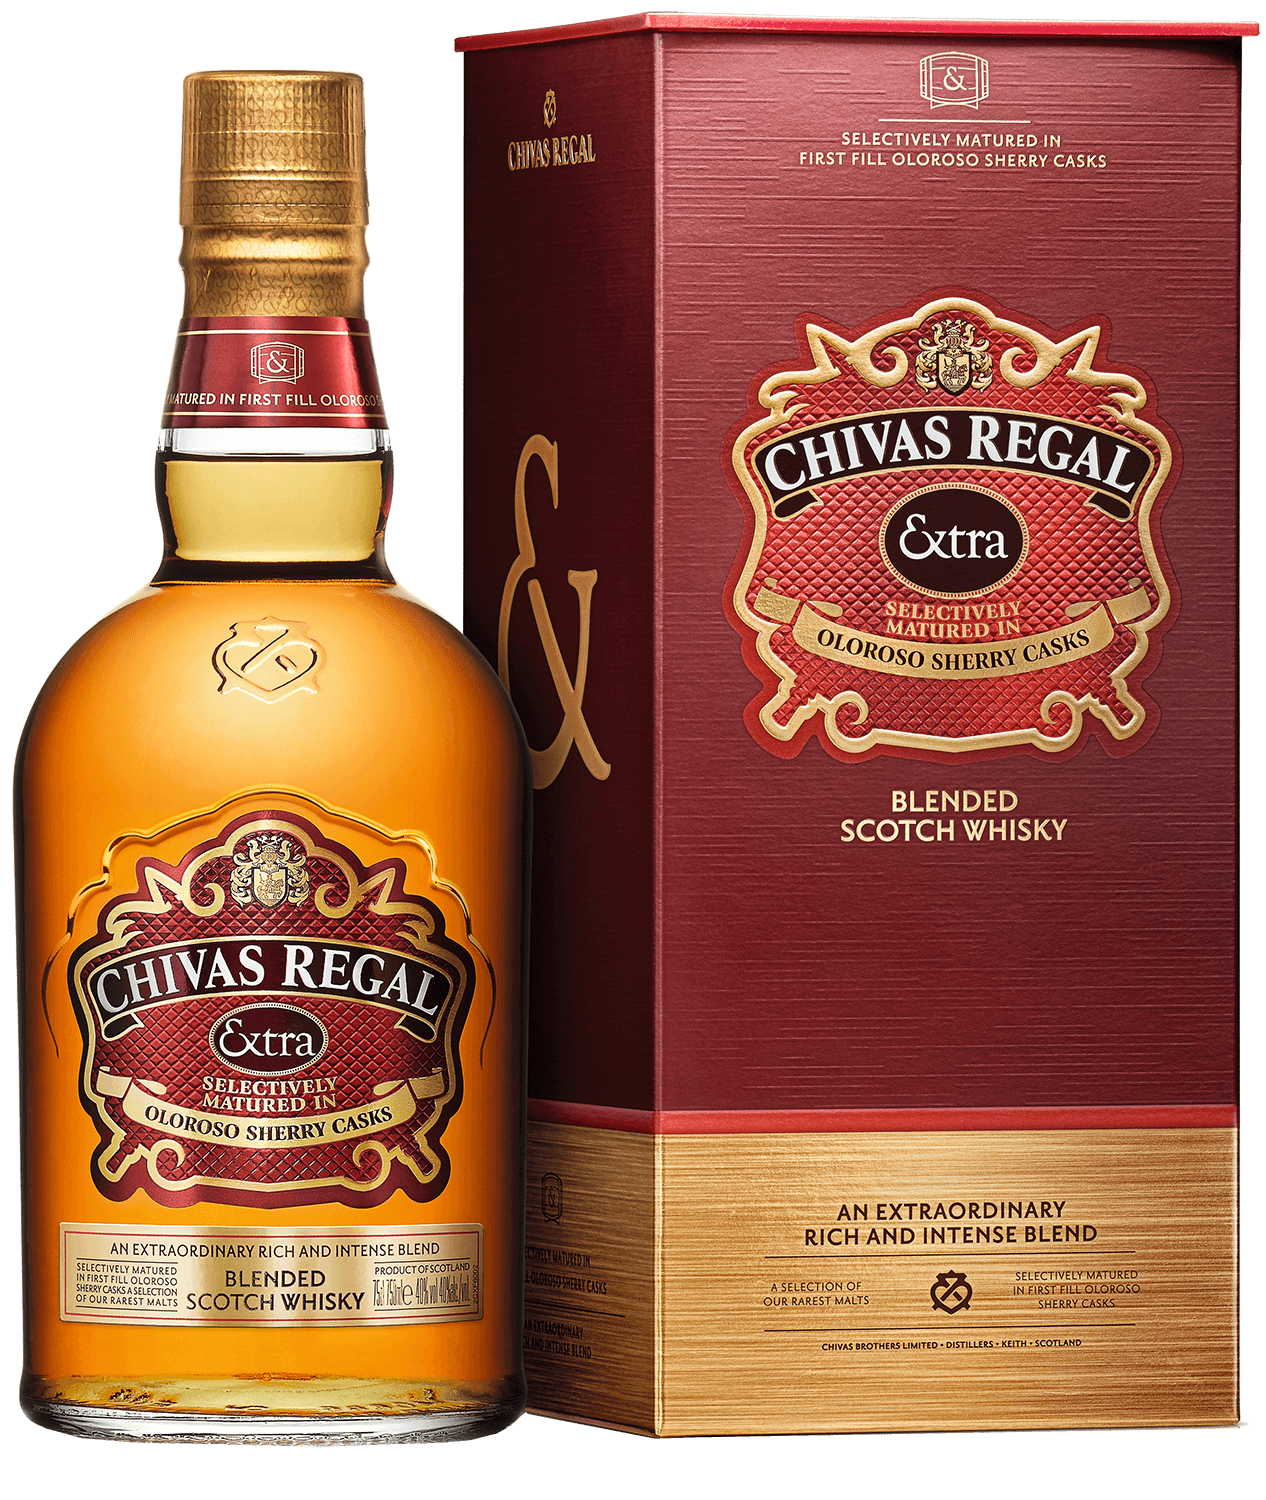 Chivas Regal Extra Blended Scotch Whisky (gift box)